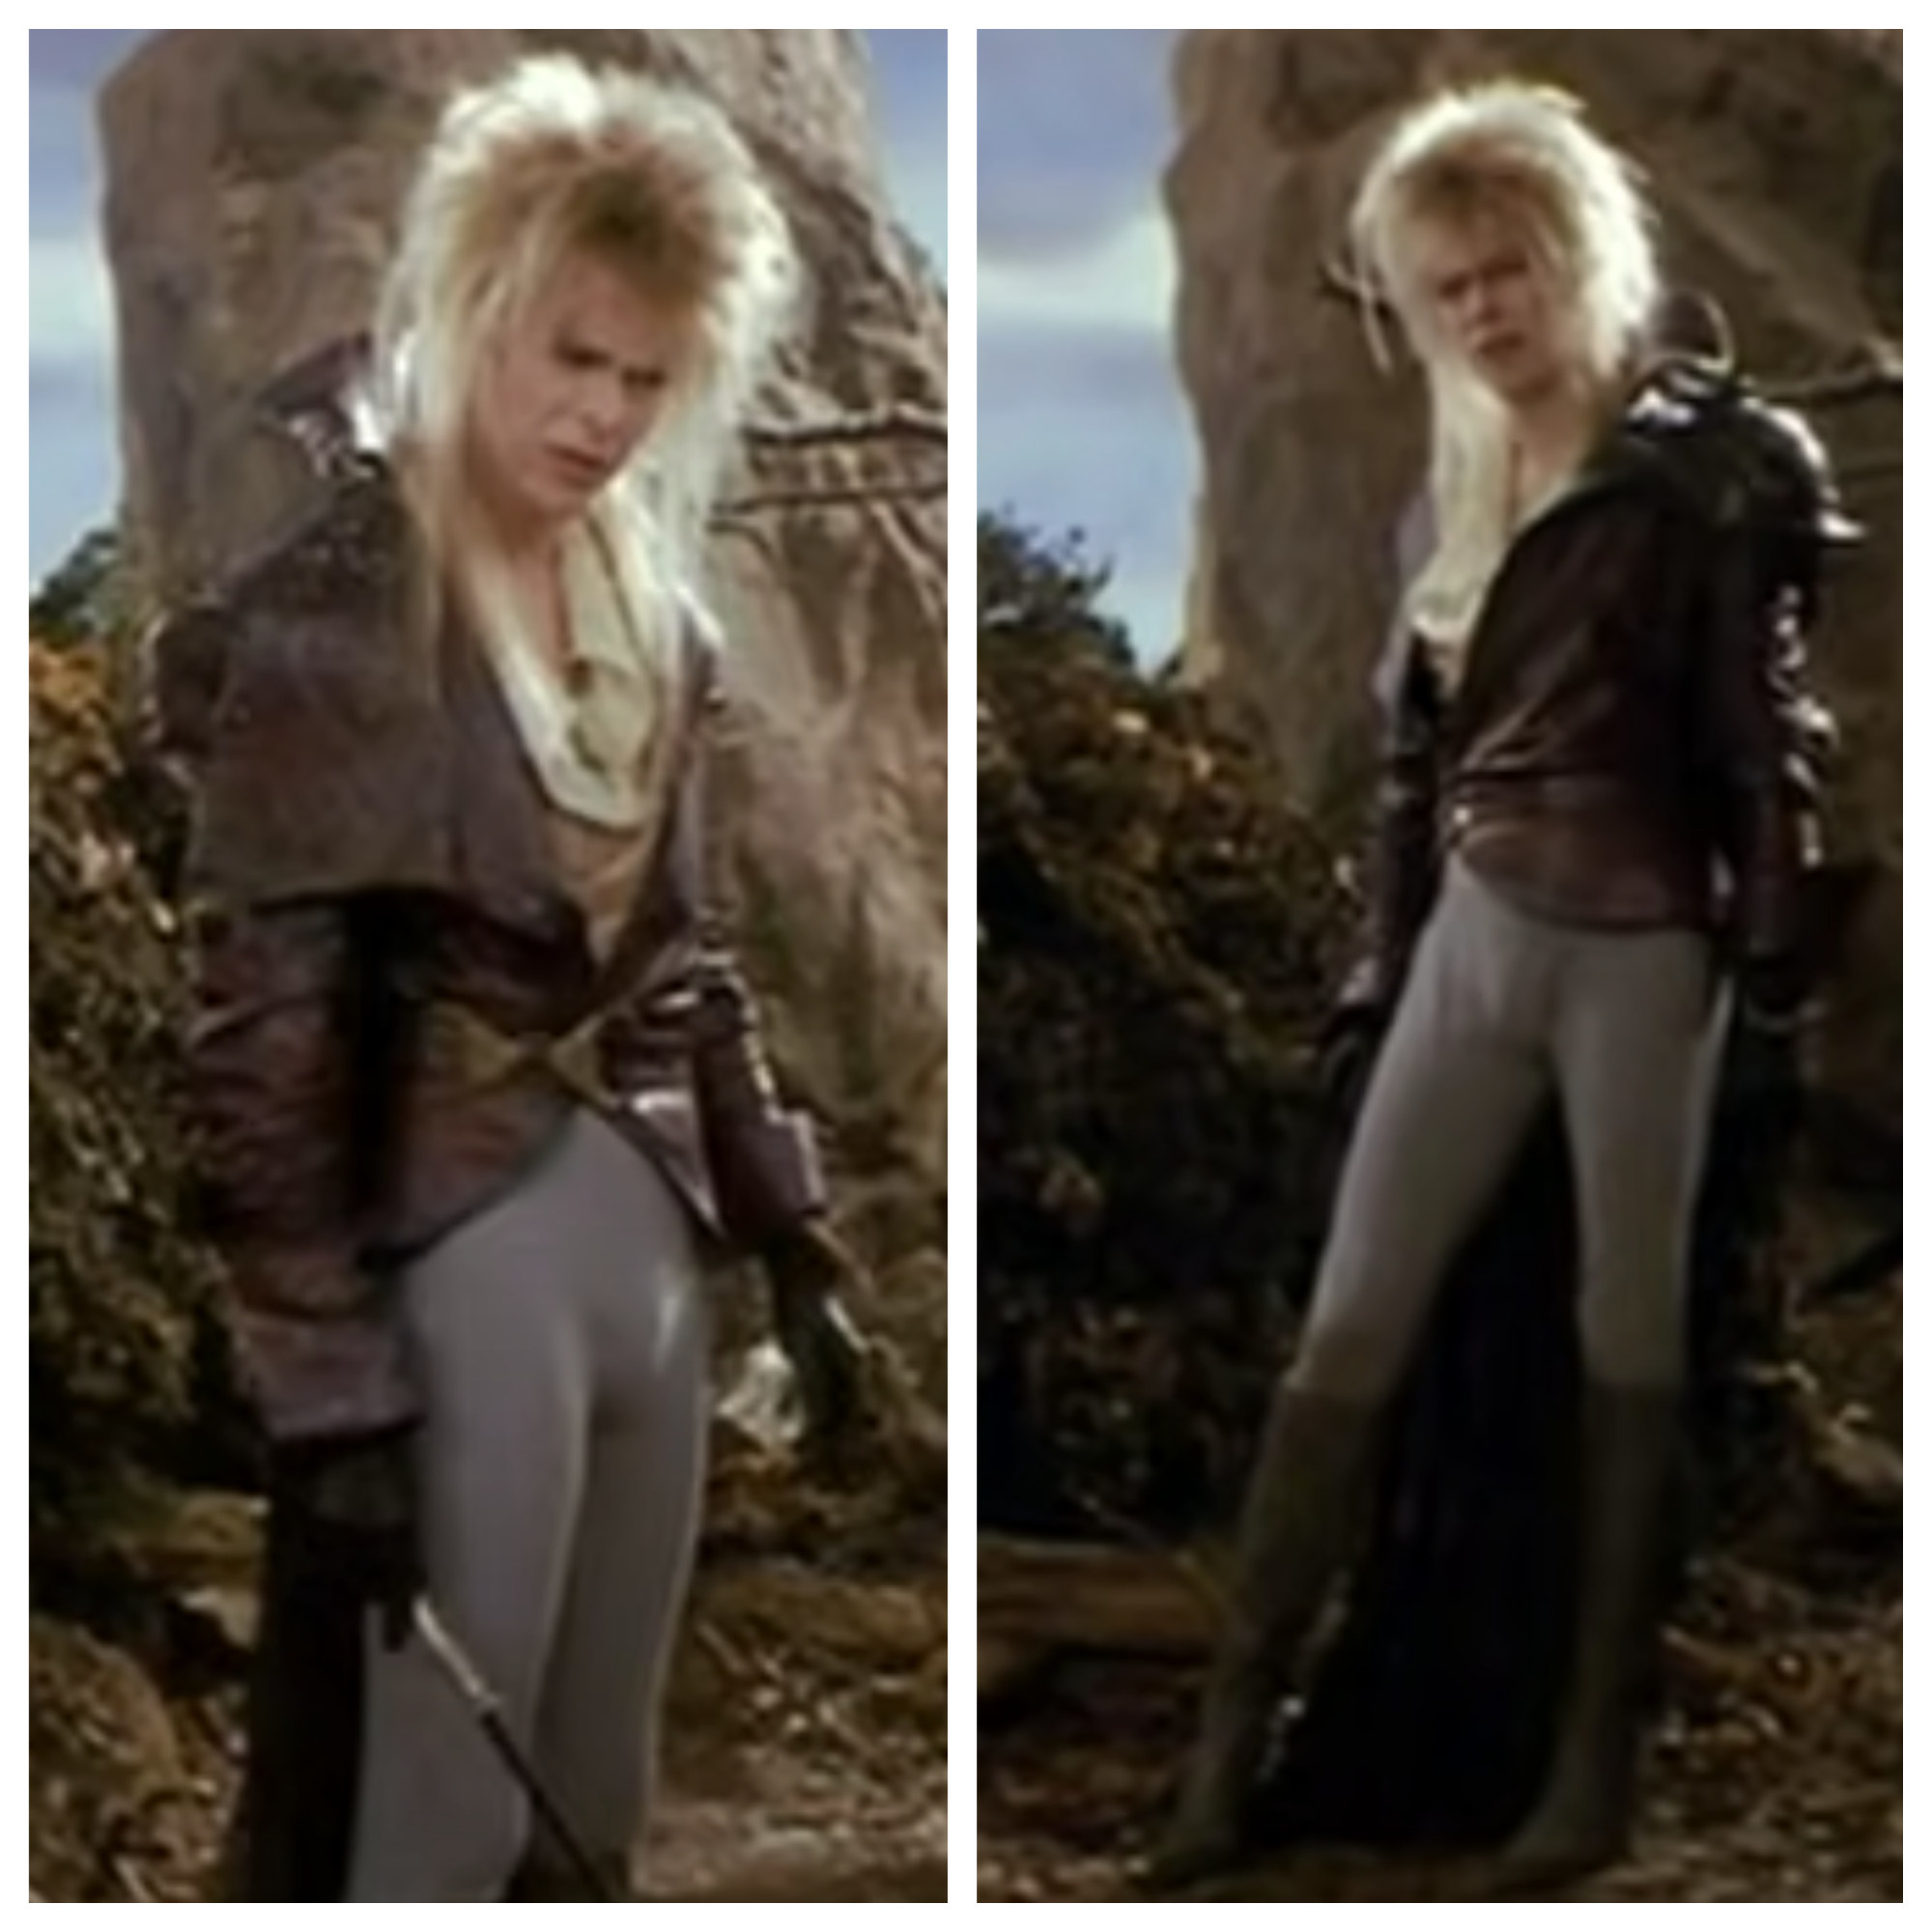 The Goblin King in Labyrinth